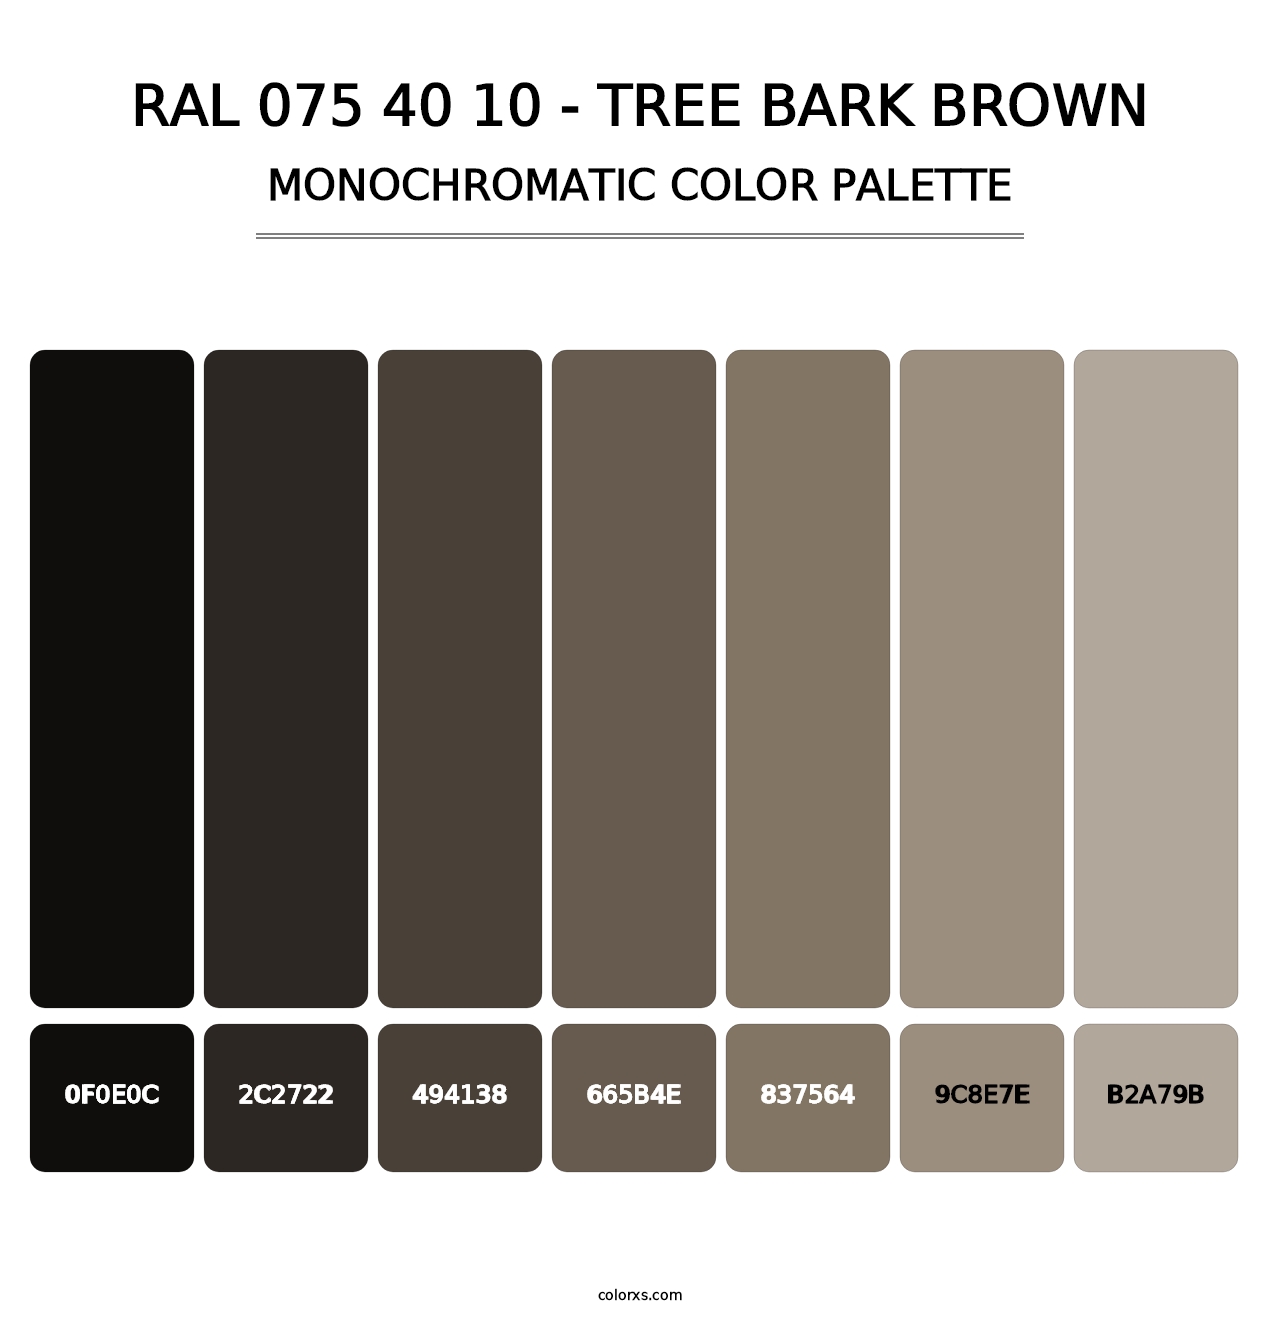 RAL 075 40 10 - Tree Bark Brown - Monochromatic Color Palette